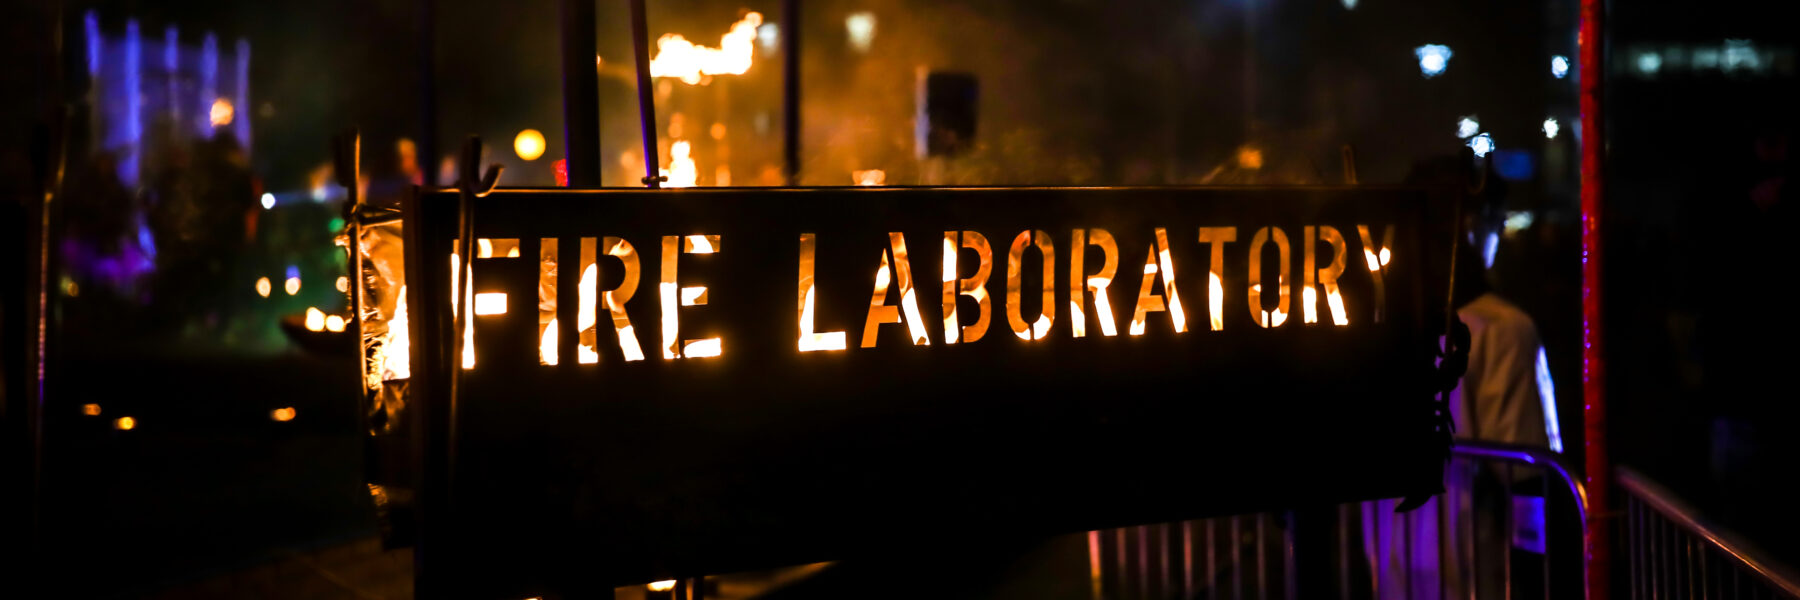 Dr Kronovator’s Fire Laboratory by Sophie Mitchell Photography